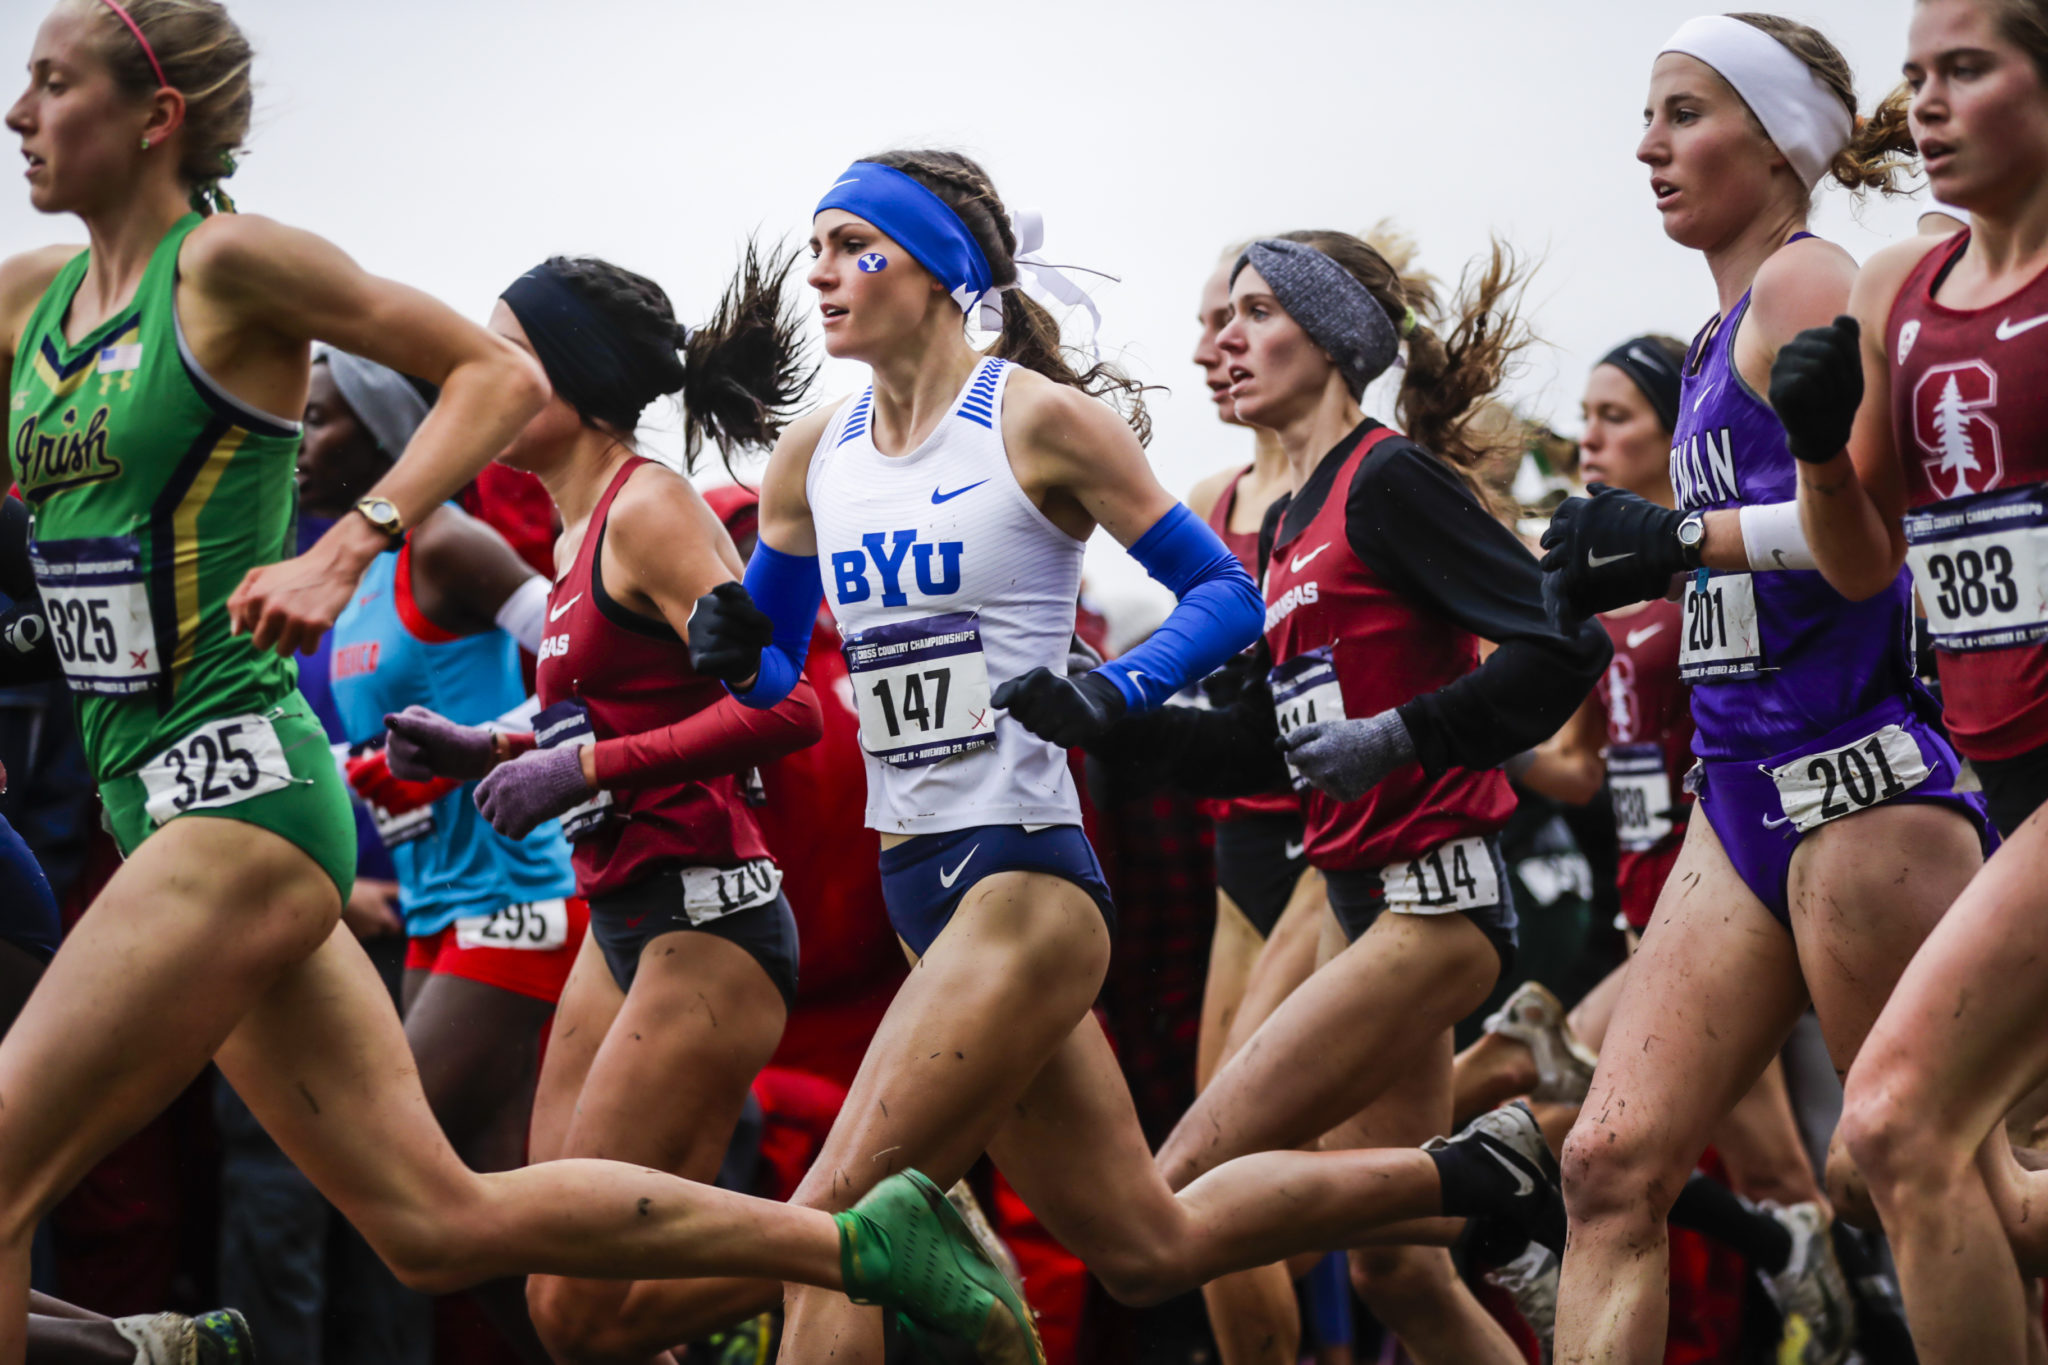 BYU's cross country teams capture national championship and runnerup